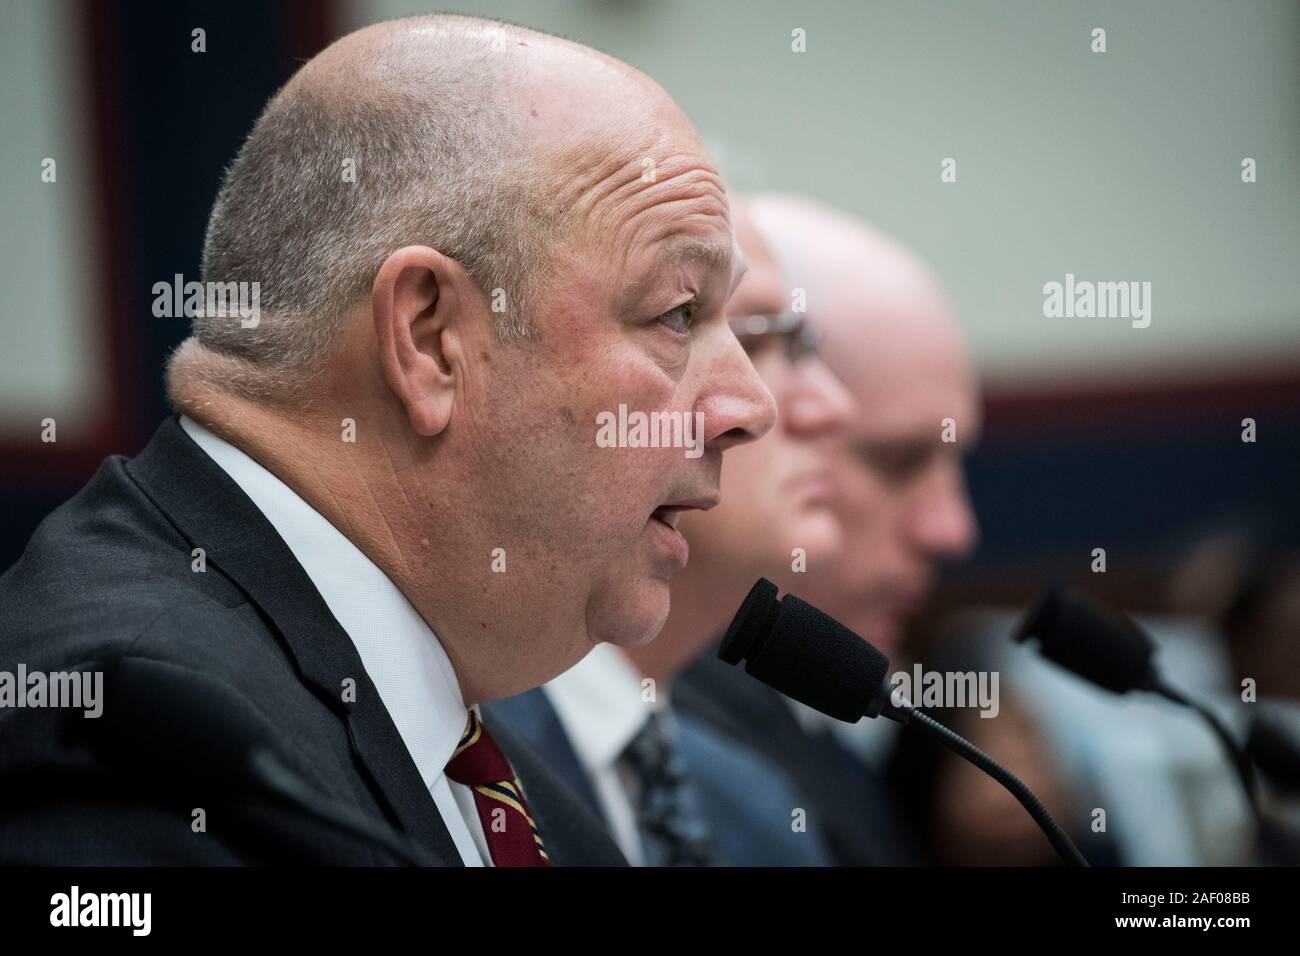 Washington, USA. 11th Dec, 2019. Steve Dickson (Front), chief of the Federal Aviation Administration (FAA), testifies before the House Committee on Transportation and Infrastructure during a hearing on 'The Boeing 737 MAX: Examining the Federal Aviation Administration's Oversight of the Aircraft's Certification' in Washington, DC, the United States, on Dec. 11, 2019. Steve Dickson said Wednesday that aviation regulators won't likely clear Boeing's troubled 737 Max airplanes for flight until 2020. Credit: Sarah Silbiger/Xinhua/Alamy Live News Stock Photo